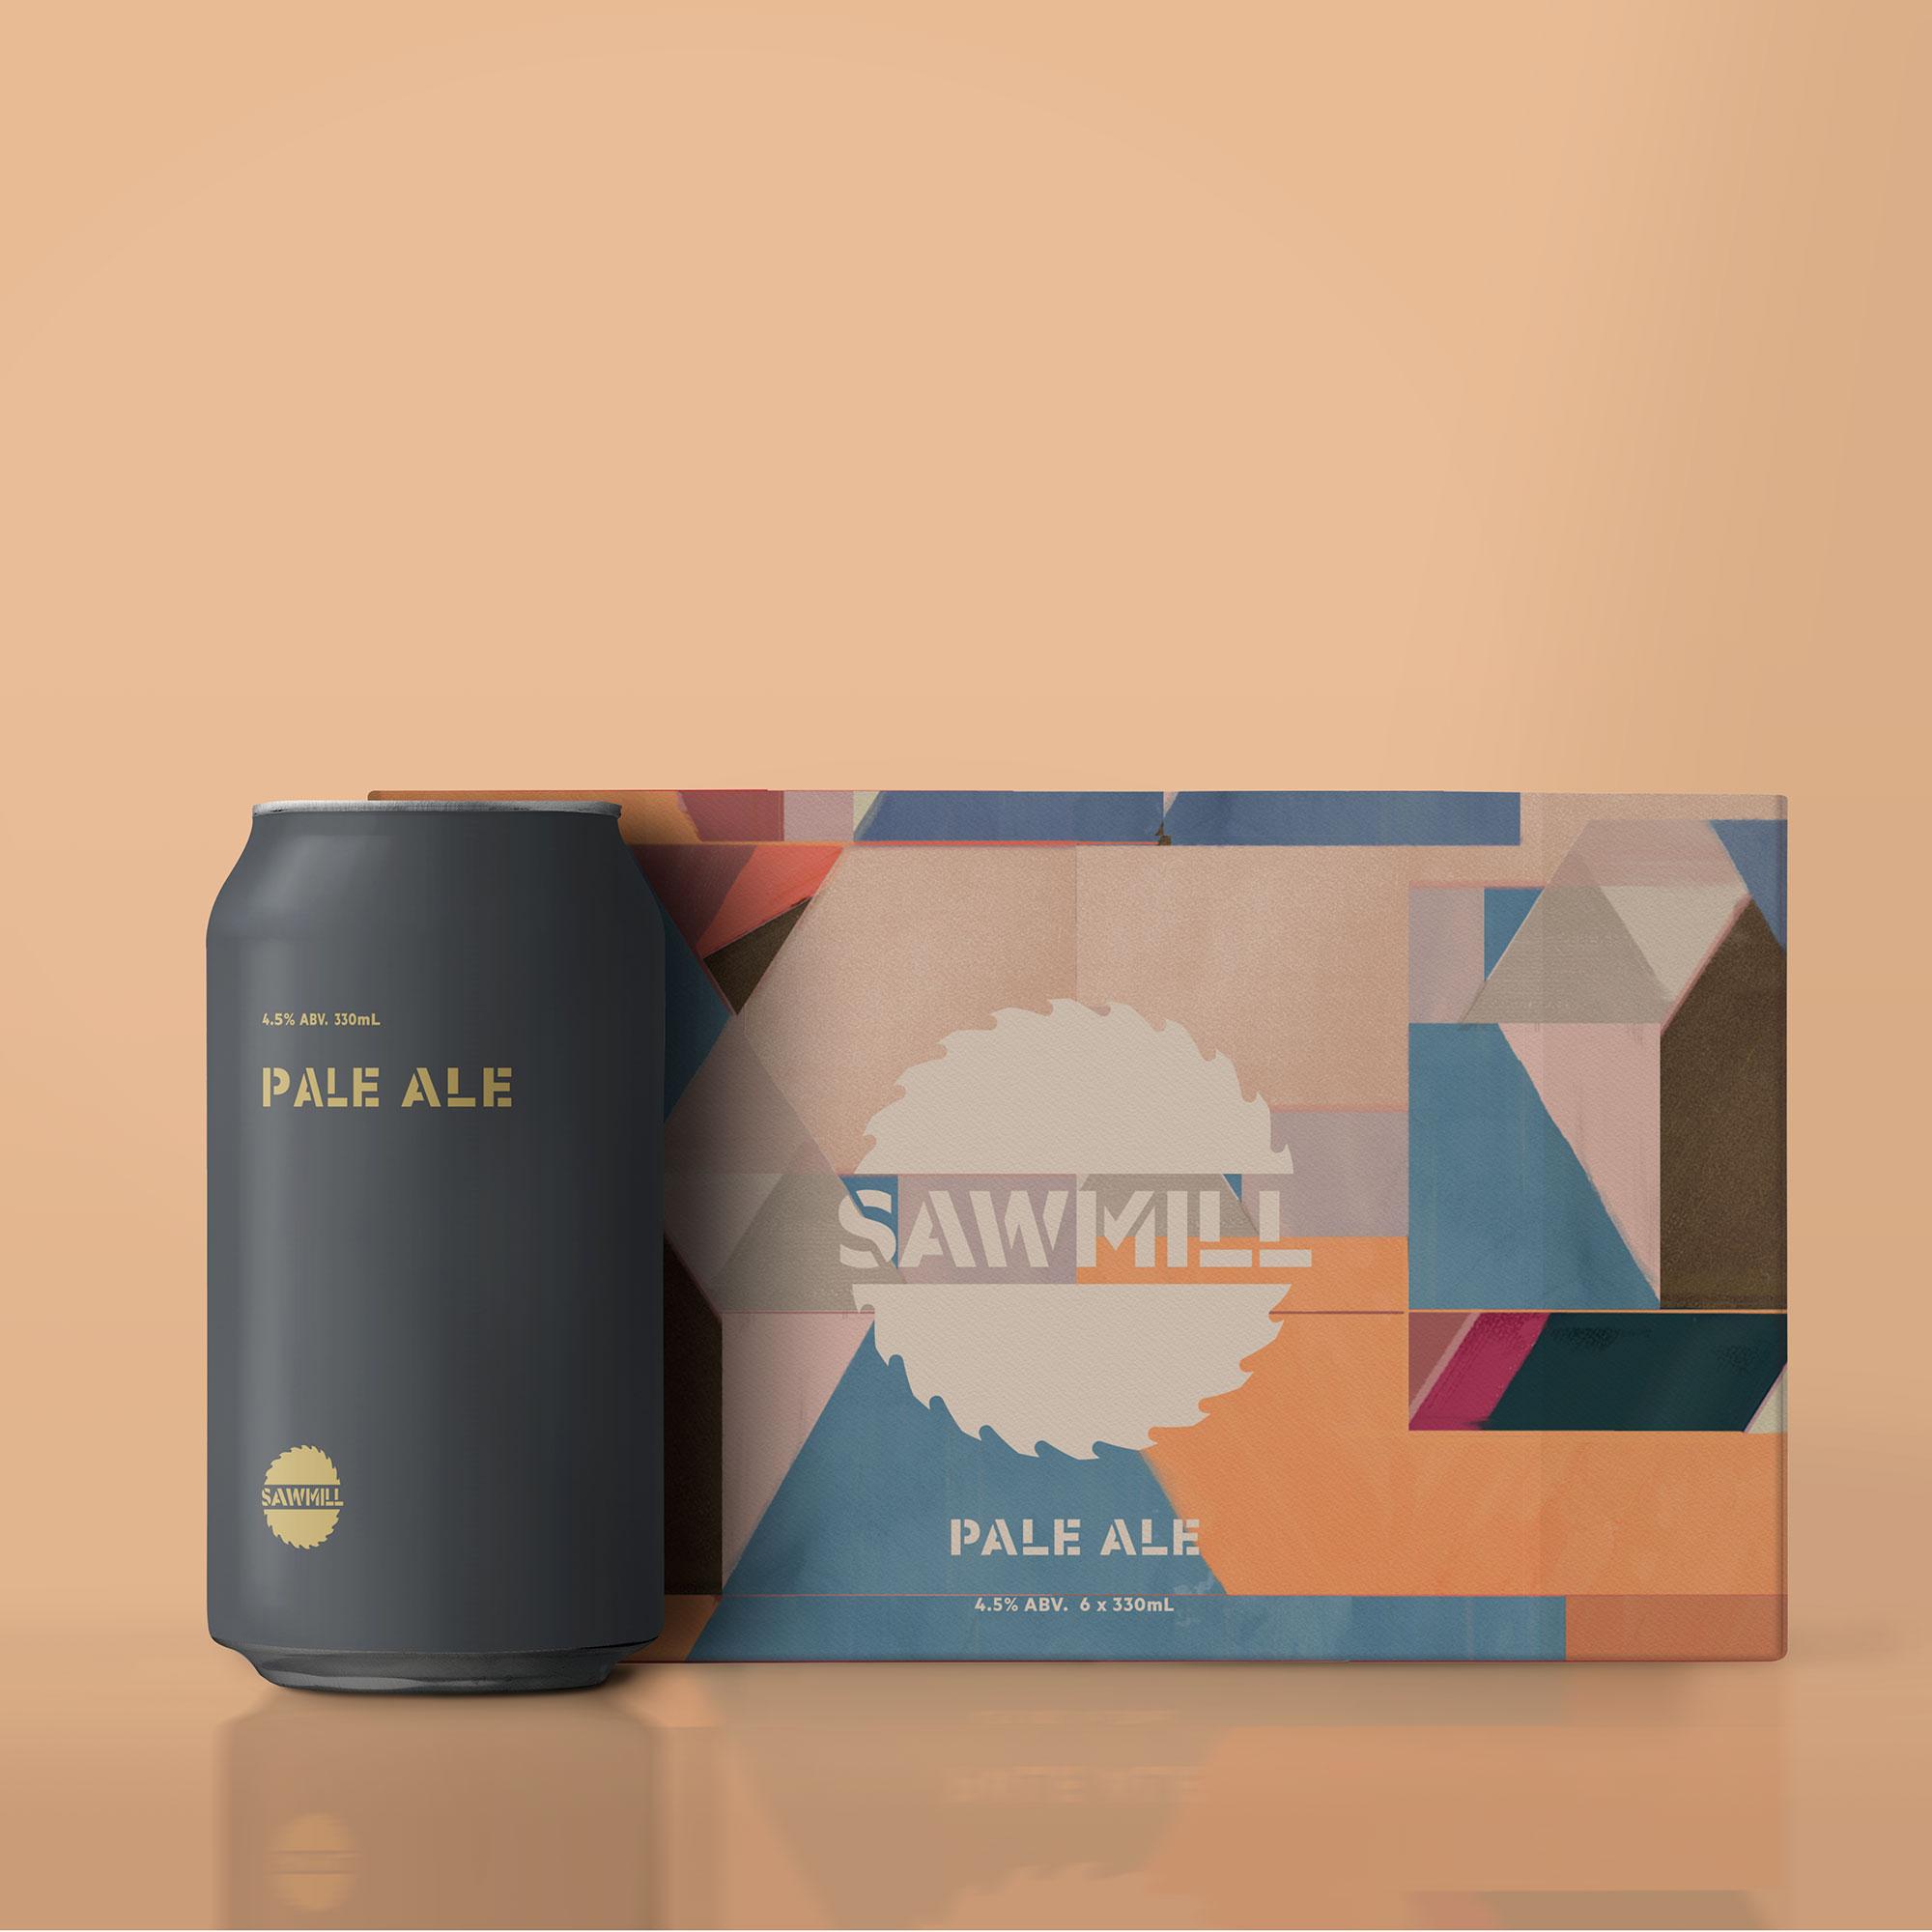 product image for Sawmill Pale Ale - 24 x 330ml cans